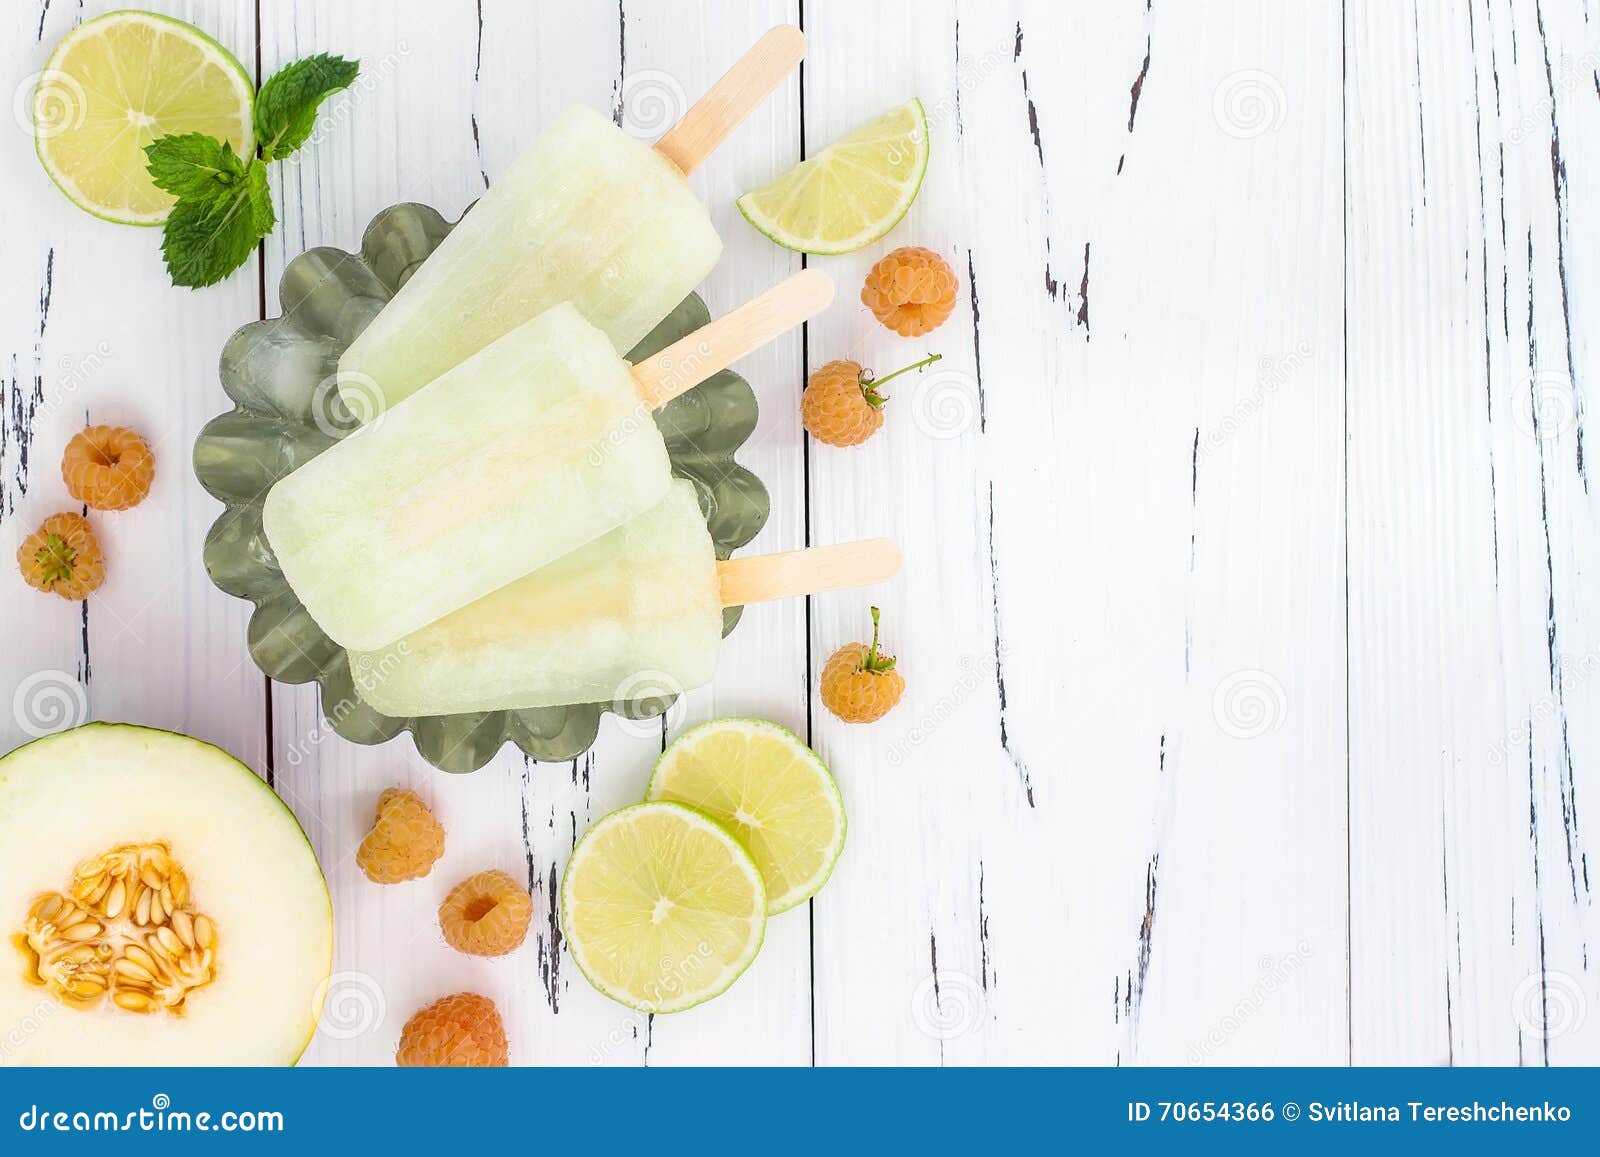 refreshing mexican style ice pops - raspberry, lime, honeydew margarita paletas - popsicles. top view. cinco de mayo recipe